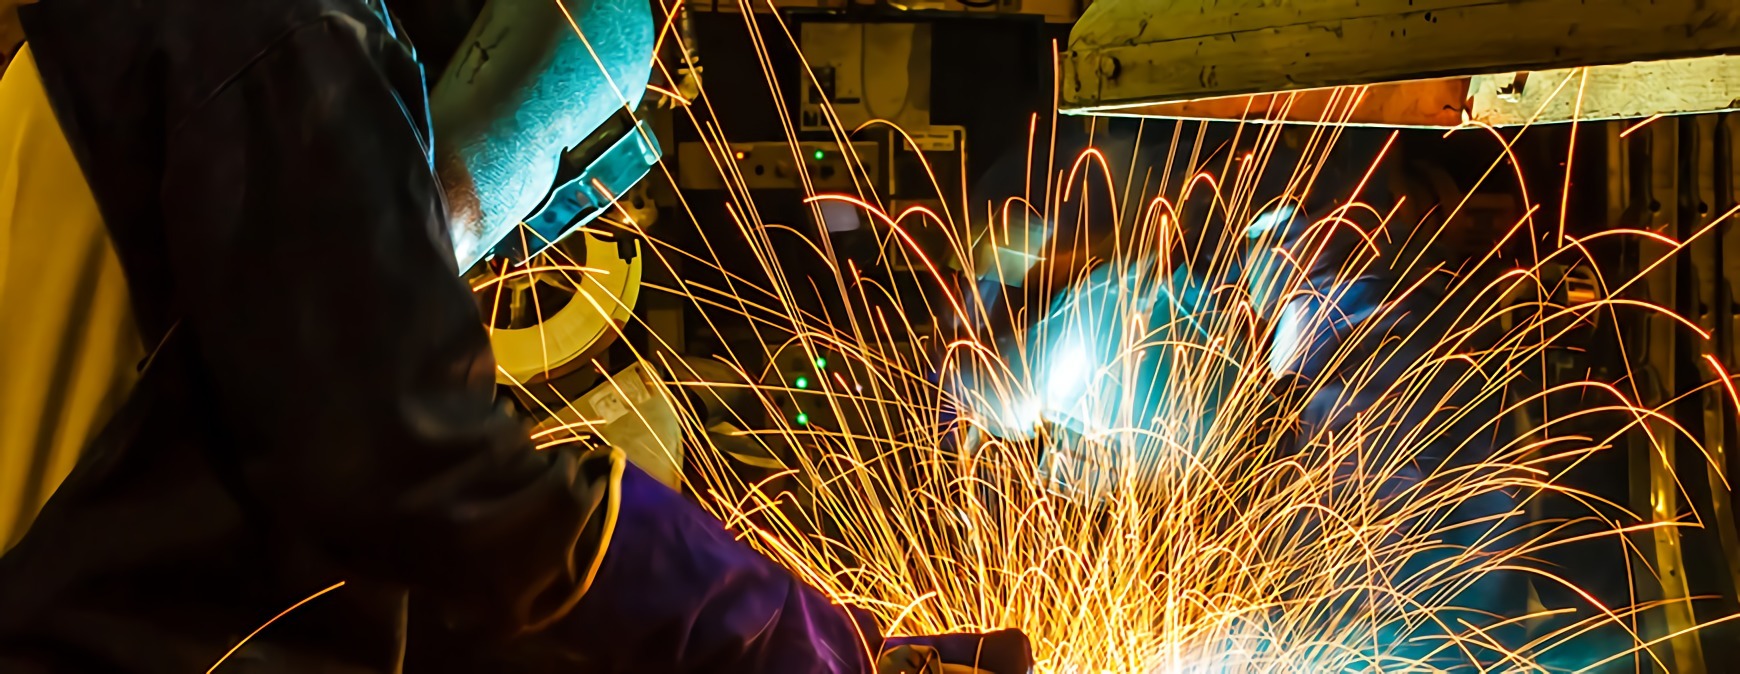 5 States With The Highest Employment Levels For Welders